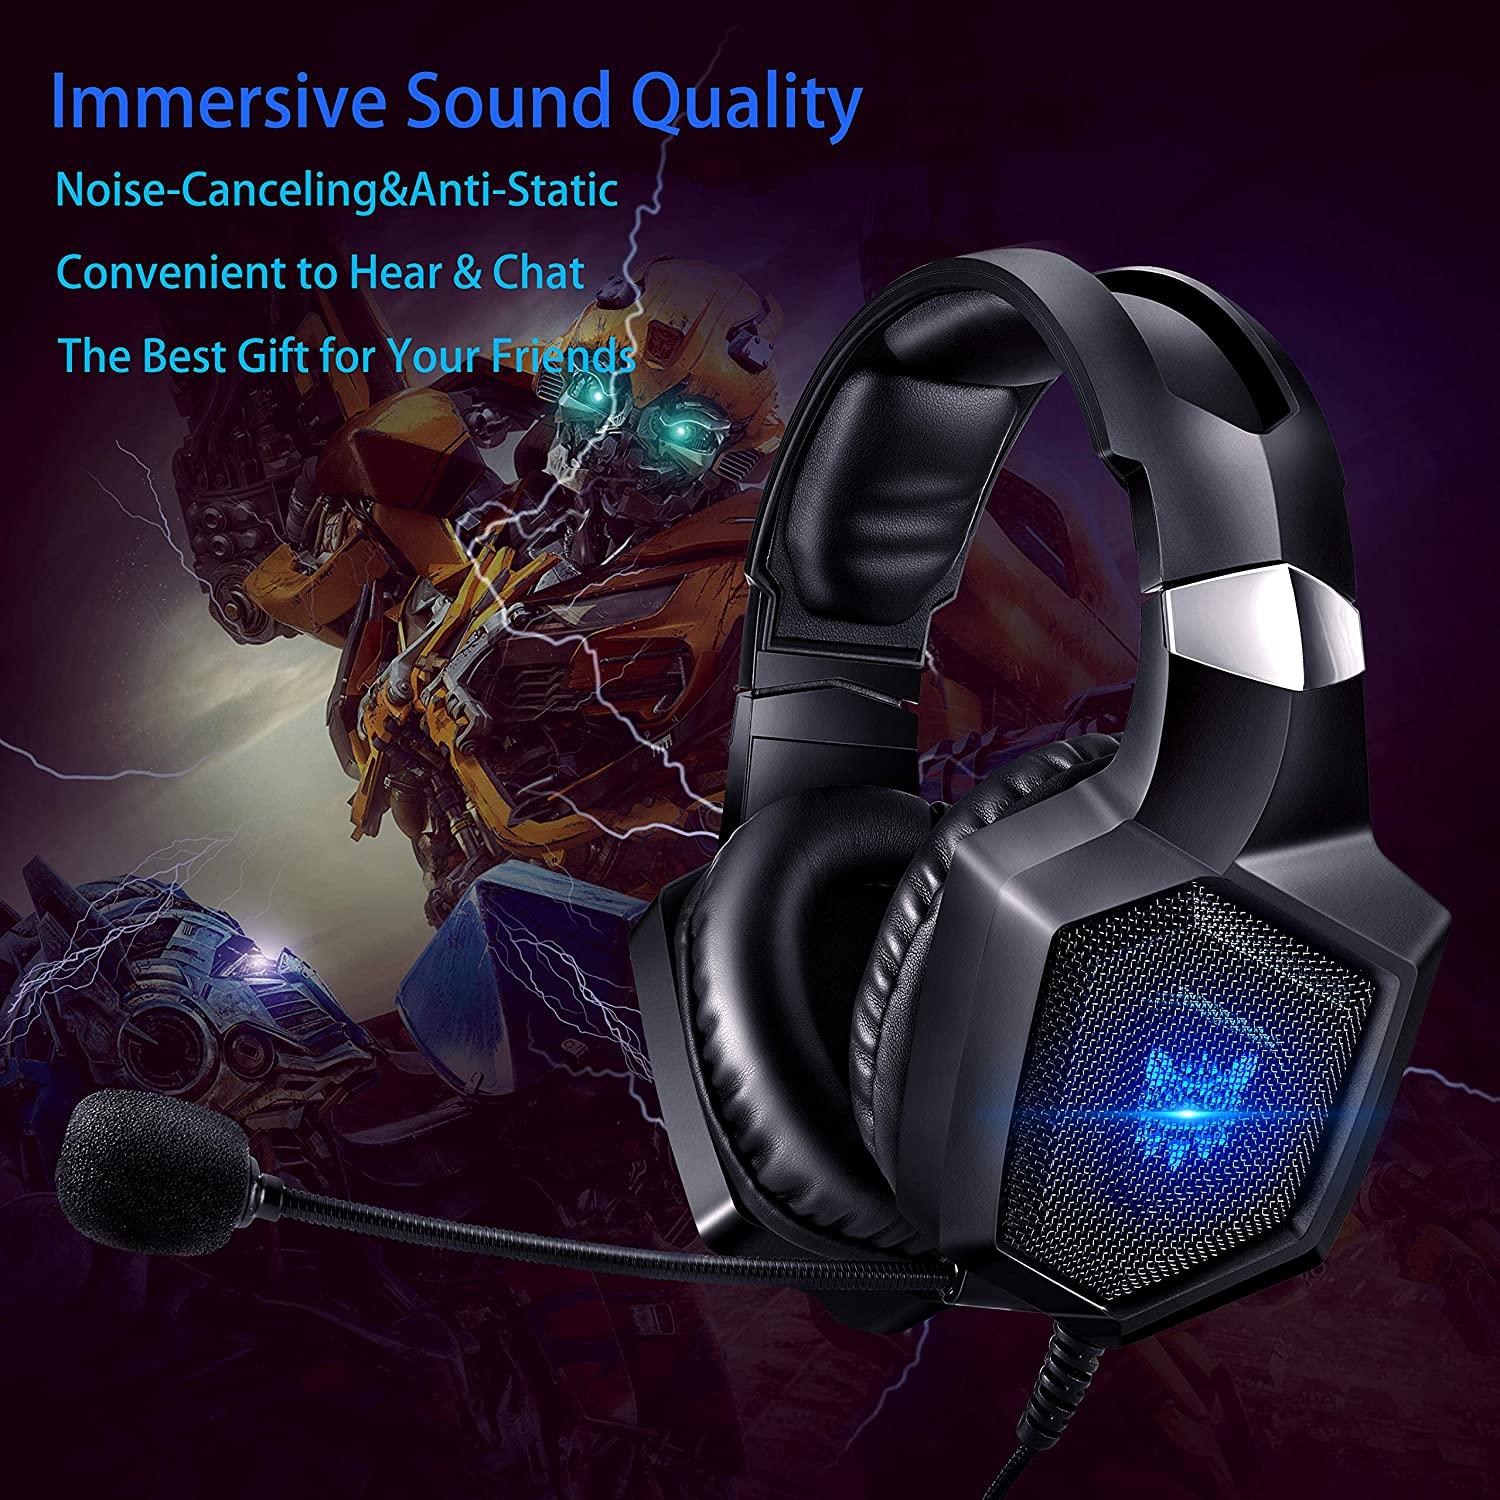 Gaming Headset,Gaming Headphones for Pc, Wired Stereo Headphones Noise-canceling with Mic,Headphones Xbox 7.1 Surround Sound Stereo LED Lights , for PS5, PS4, Xbox Series, Computer, Laptop